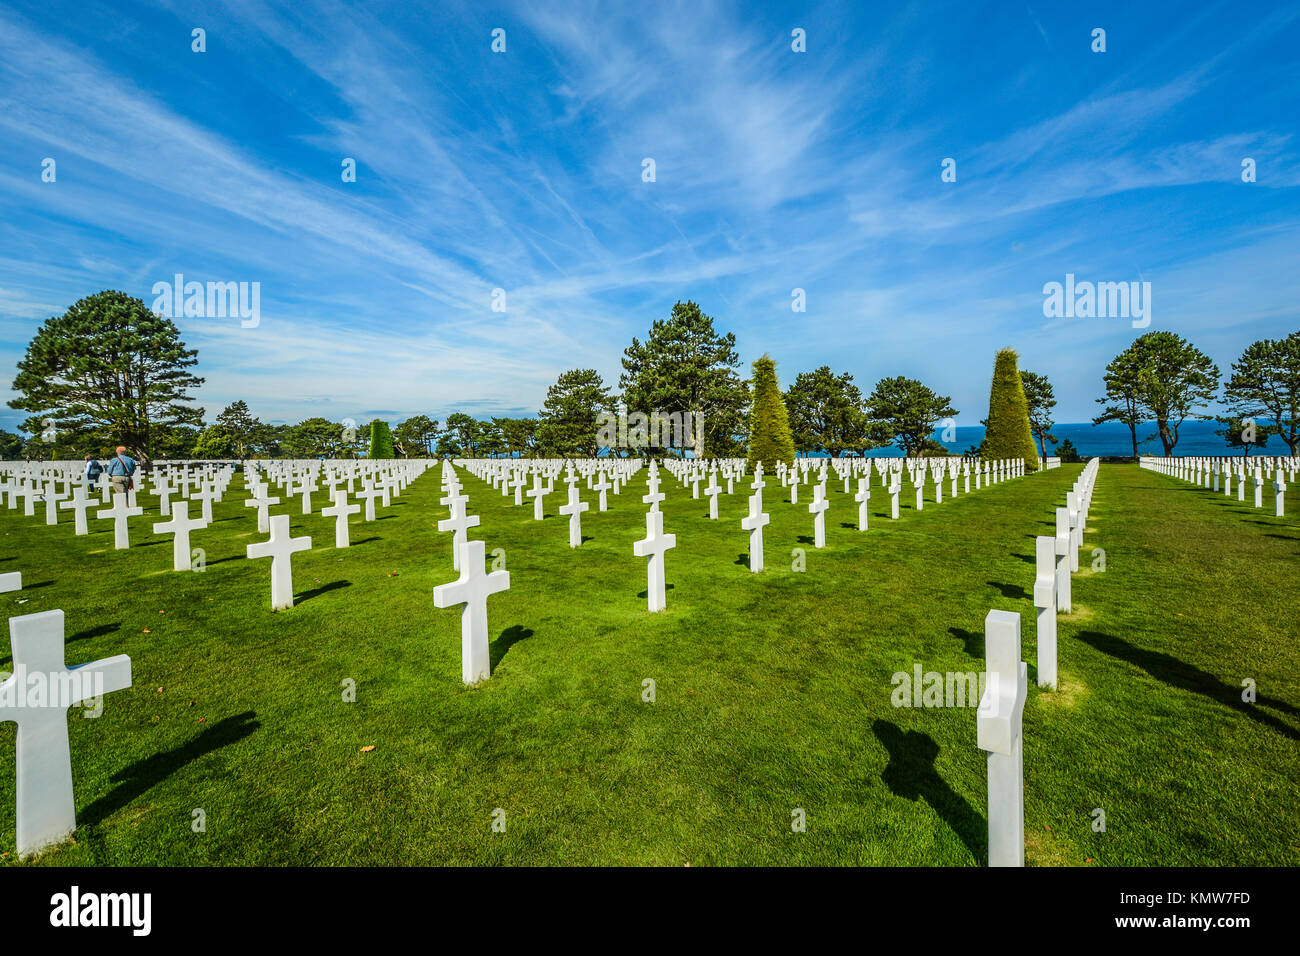 The Normandy American Cemetery and Memorial at Colleville-sur-Mer on a sunny day with rows of gravestones honoring the fallen soldiers Stock Photo